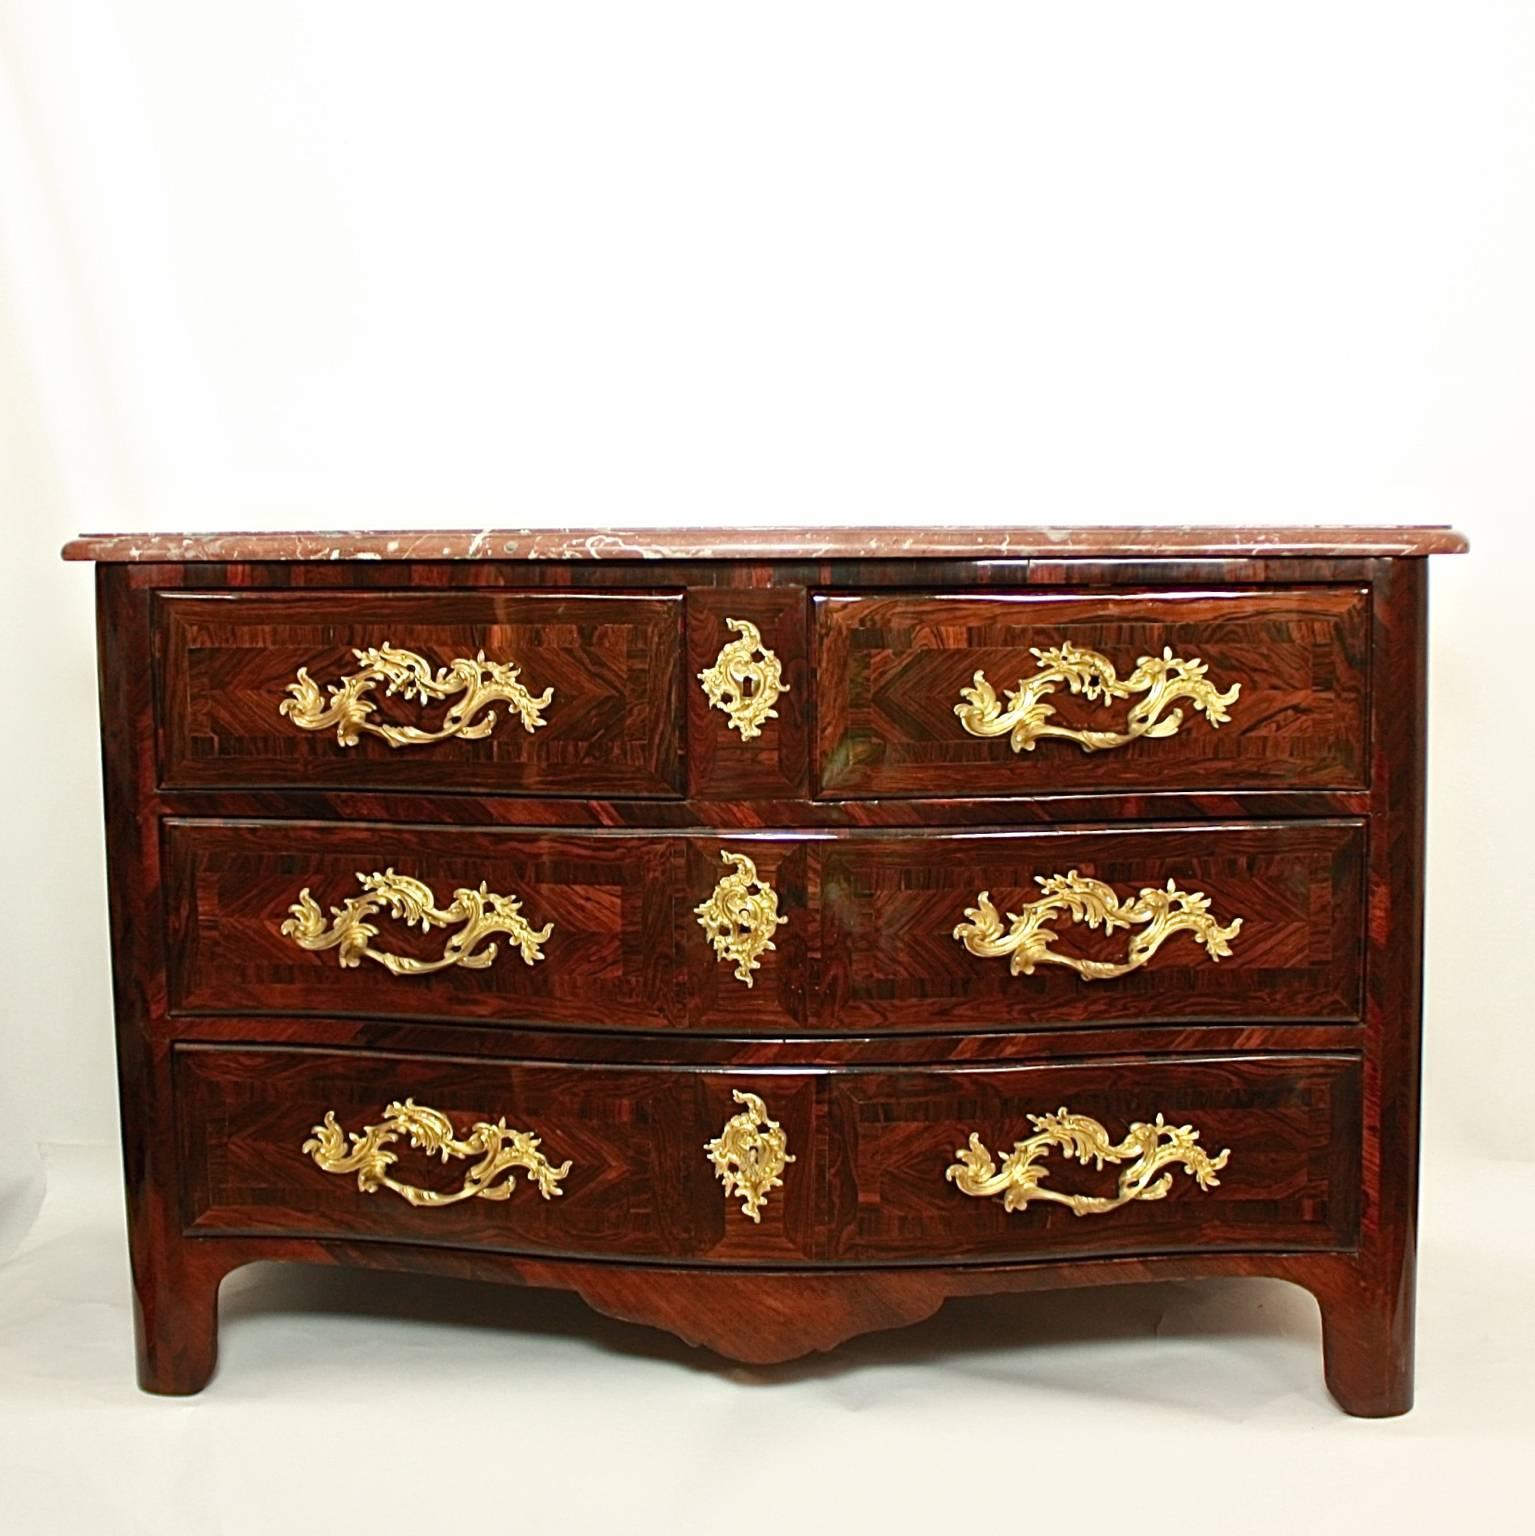 Early 18th century Regence commode or chest of drawers with rosewood parquetry and a moulded russet marble top (griotte de Belgique) above a serpentine shaped front with two long drawers below and two short drawers above, with rounded corners, on